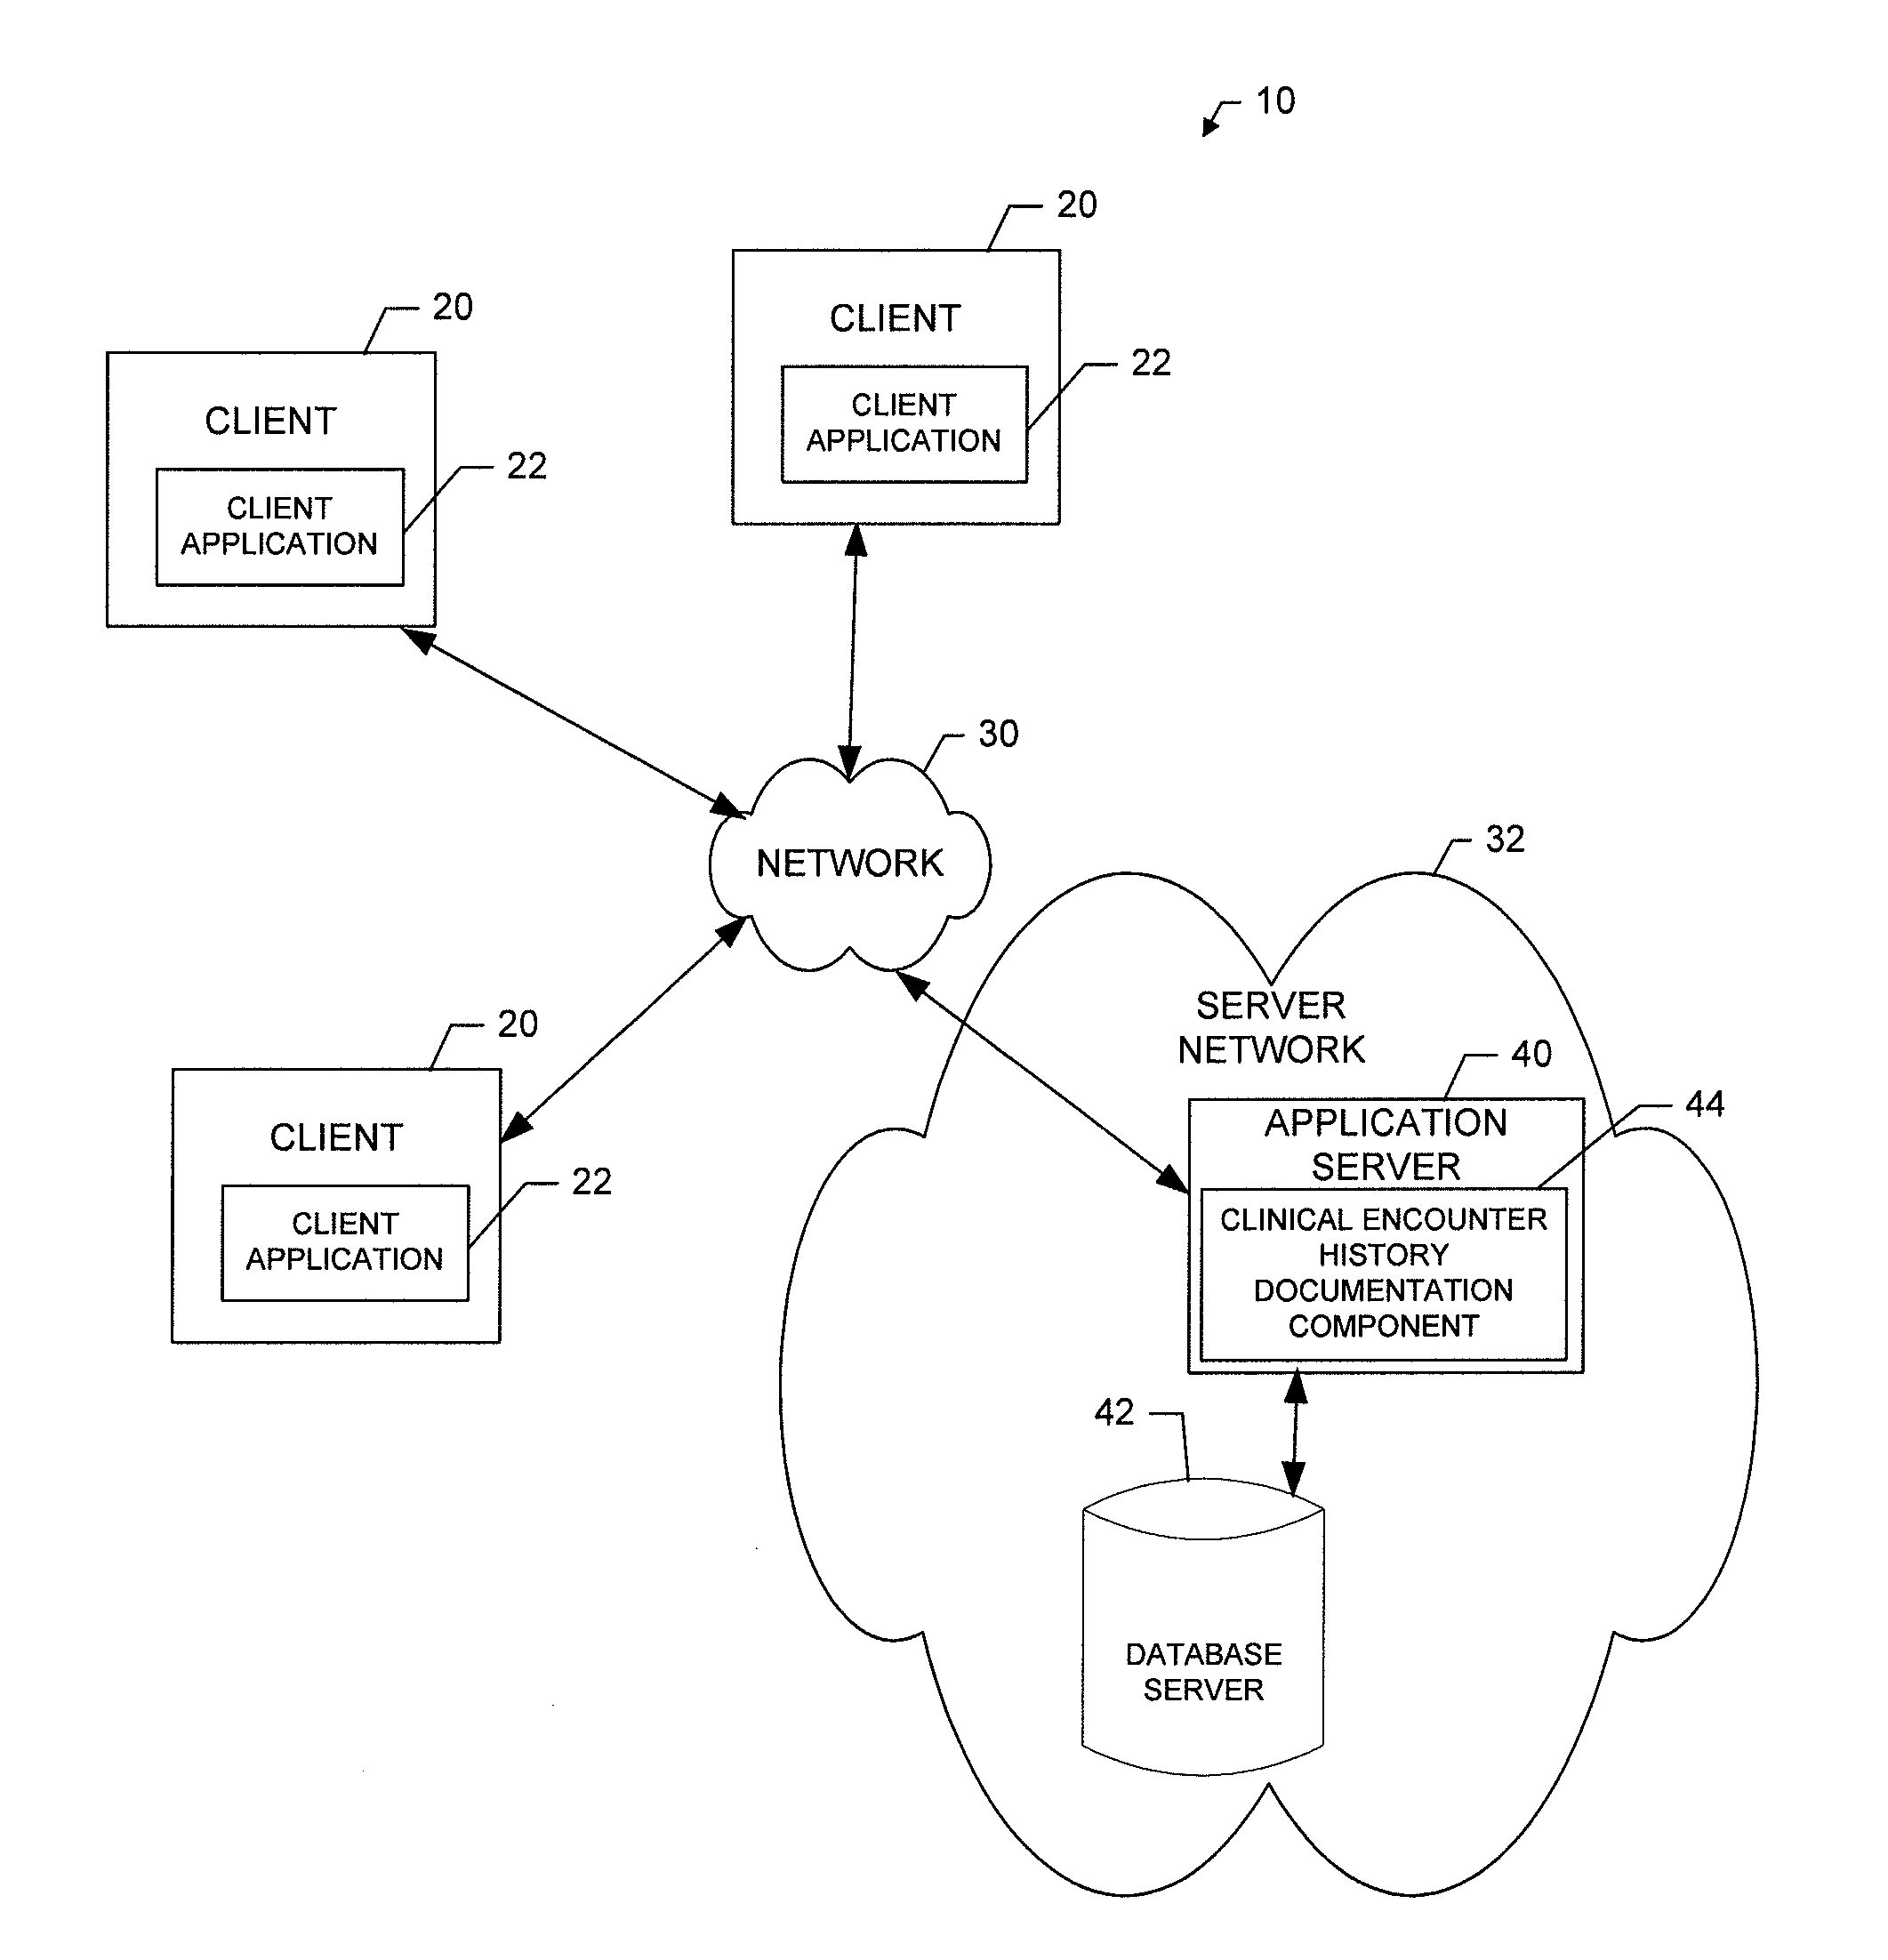 Method, apparatus and computer program product for providing documentation of a clinical encounter history